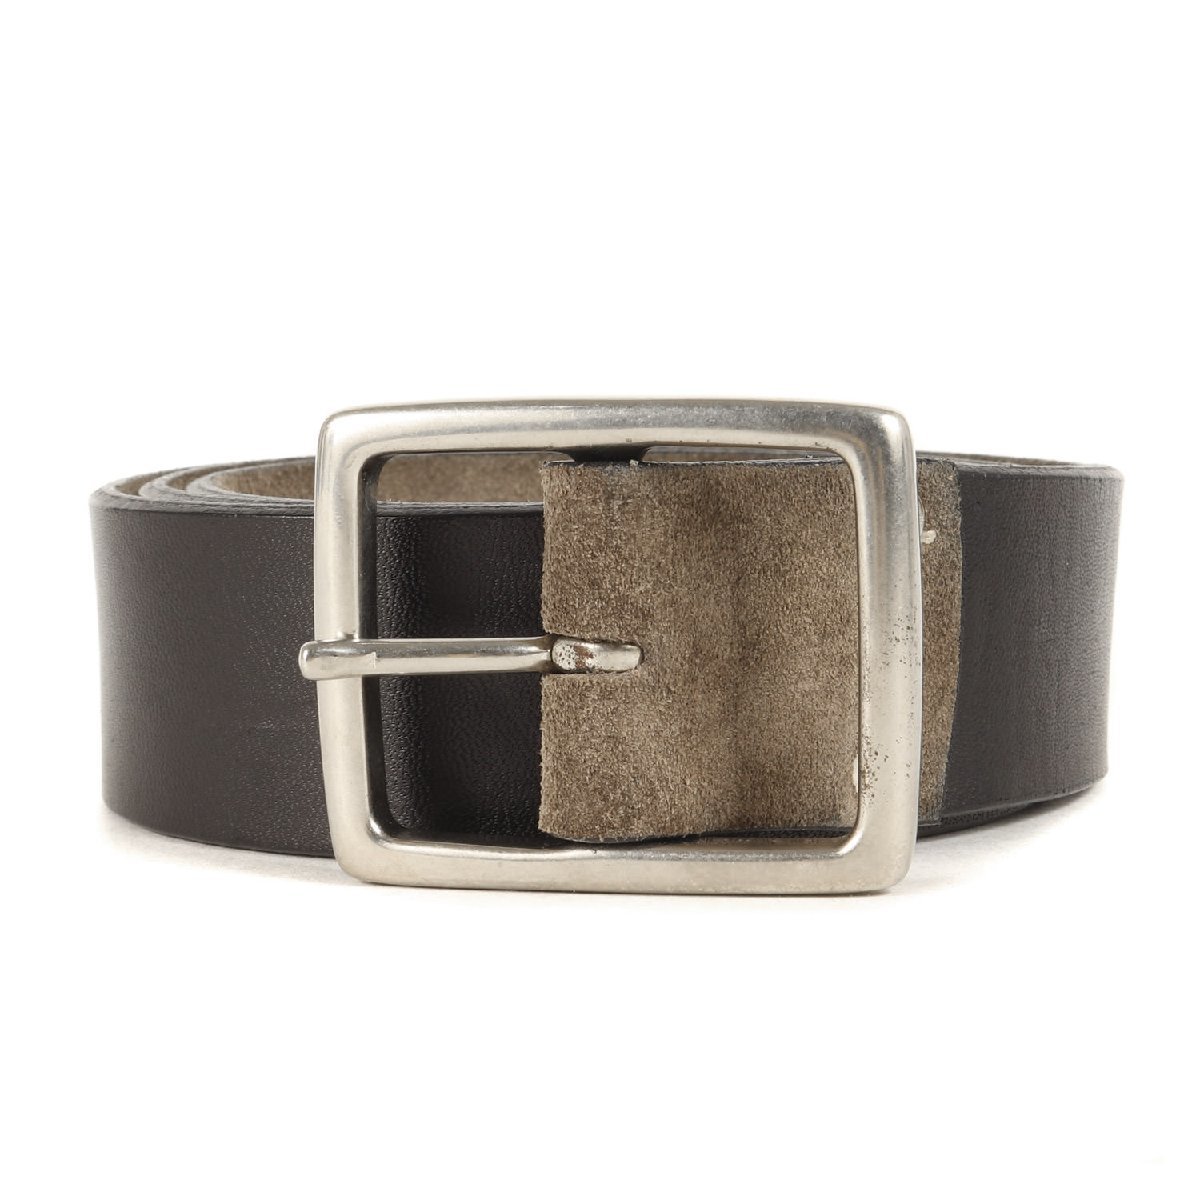 BUTTERO Buttero sk airbag ru suede leather belt gray 80 Italy made brand simple 